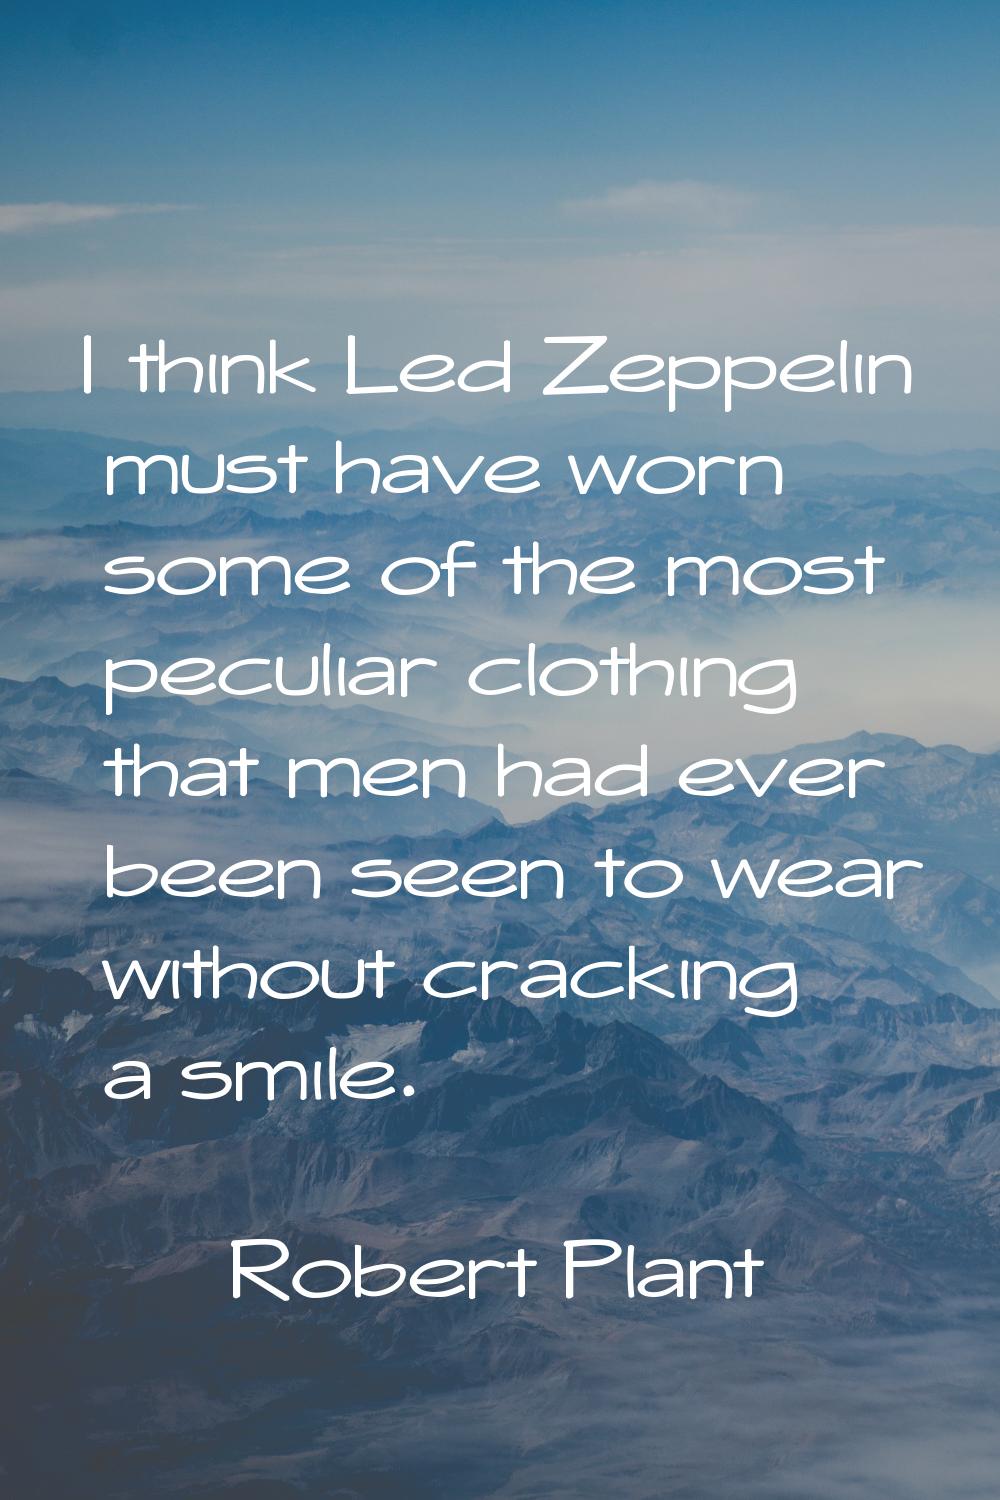 I think Led Zeppelin must have worn some of the most peculiar clothing that men had ever been seen 